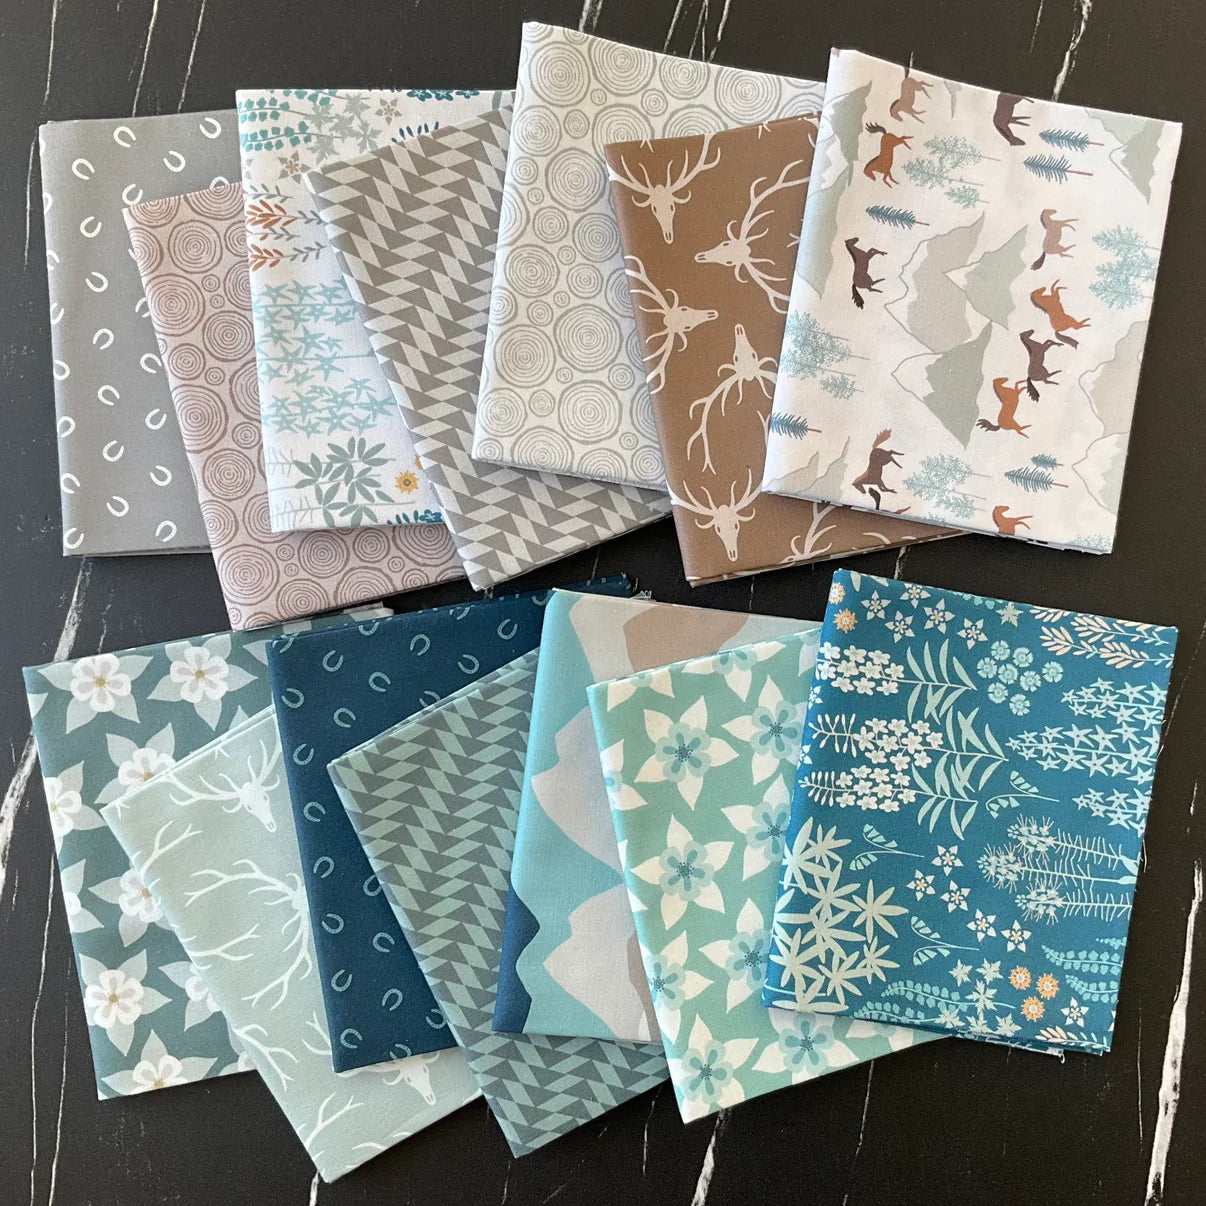 Scrappy Arrows Quilt featuring Horizon by Pippa Shaw : Quilt Kit